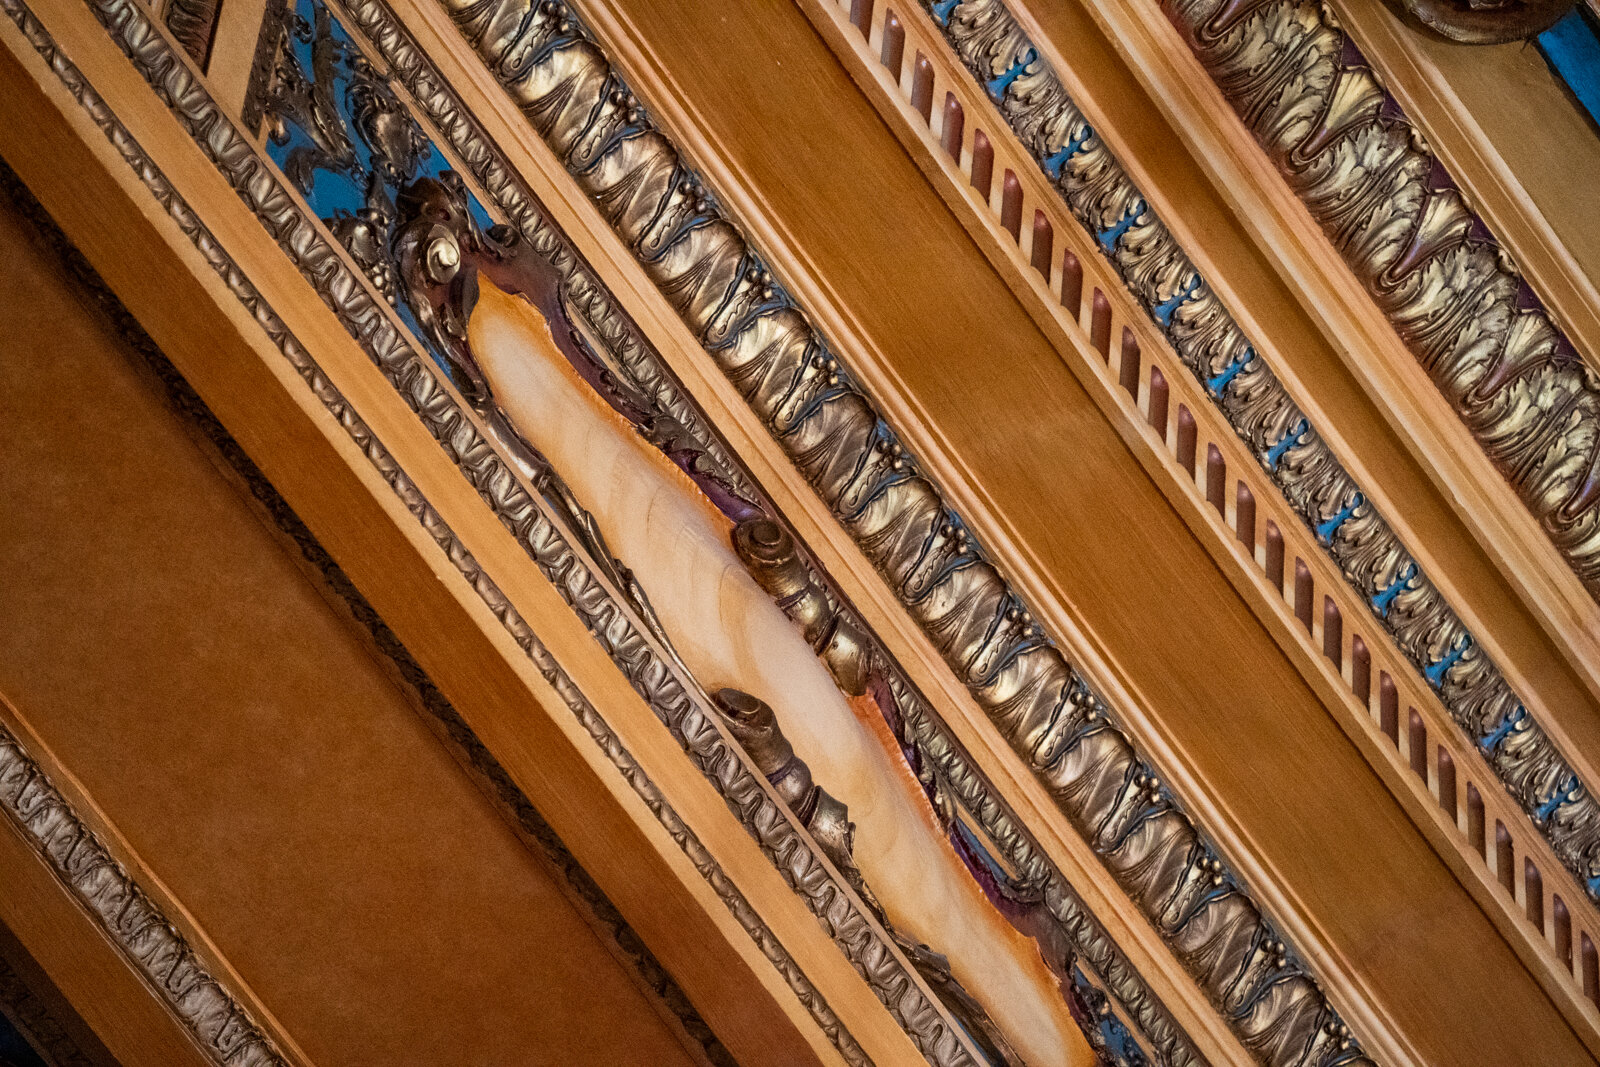  Cast plaster ceiling cornice in sheas theatre, buffalo New York. painted gold with blue and silver accents. 